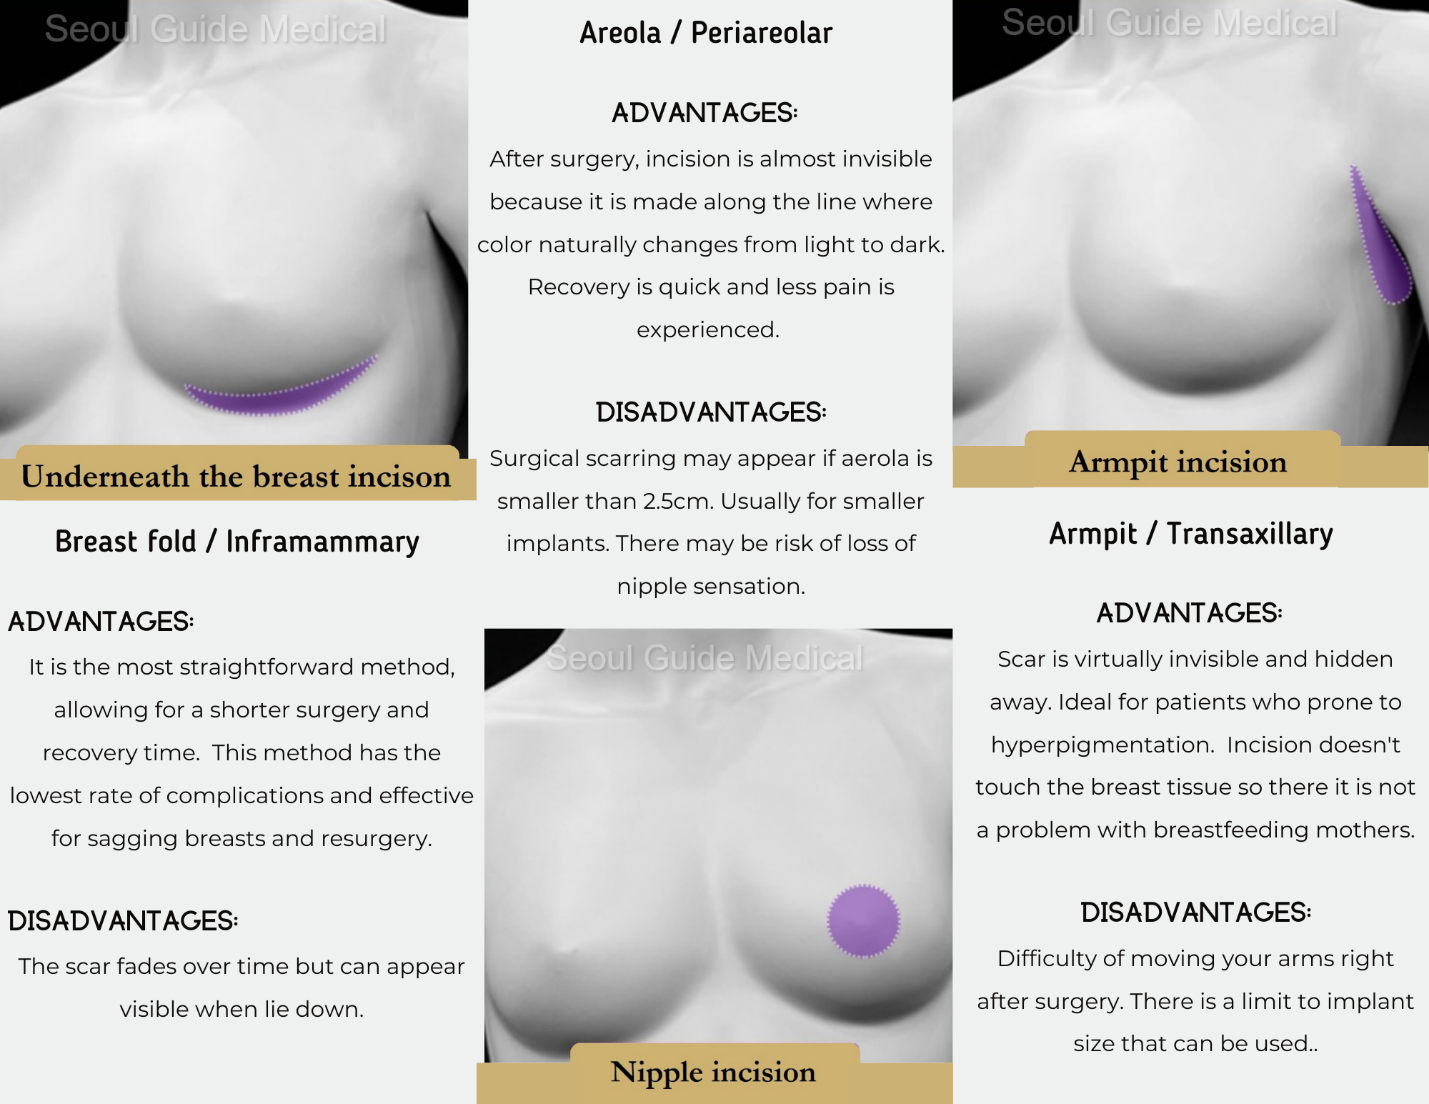 Your Guide To Breast Augmentation in Korea This 2022 - Seoul Guide